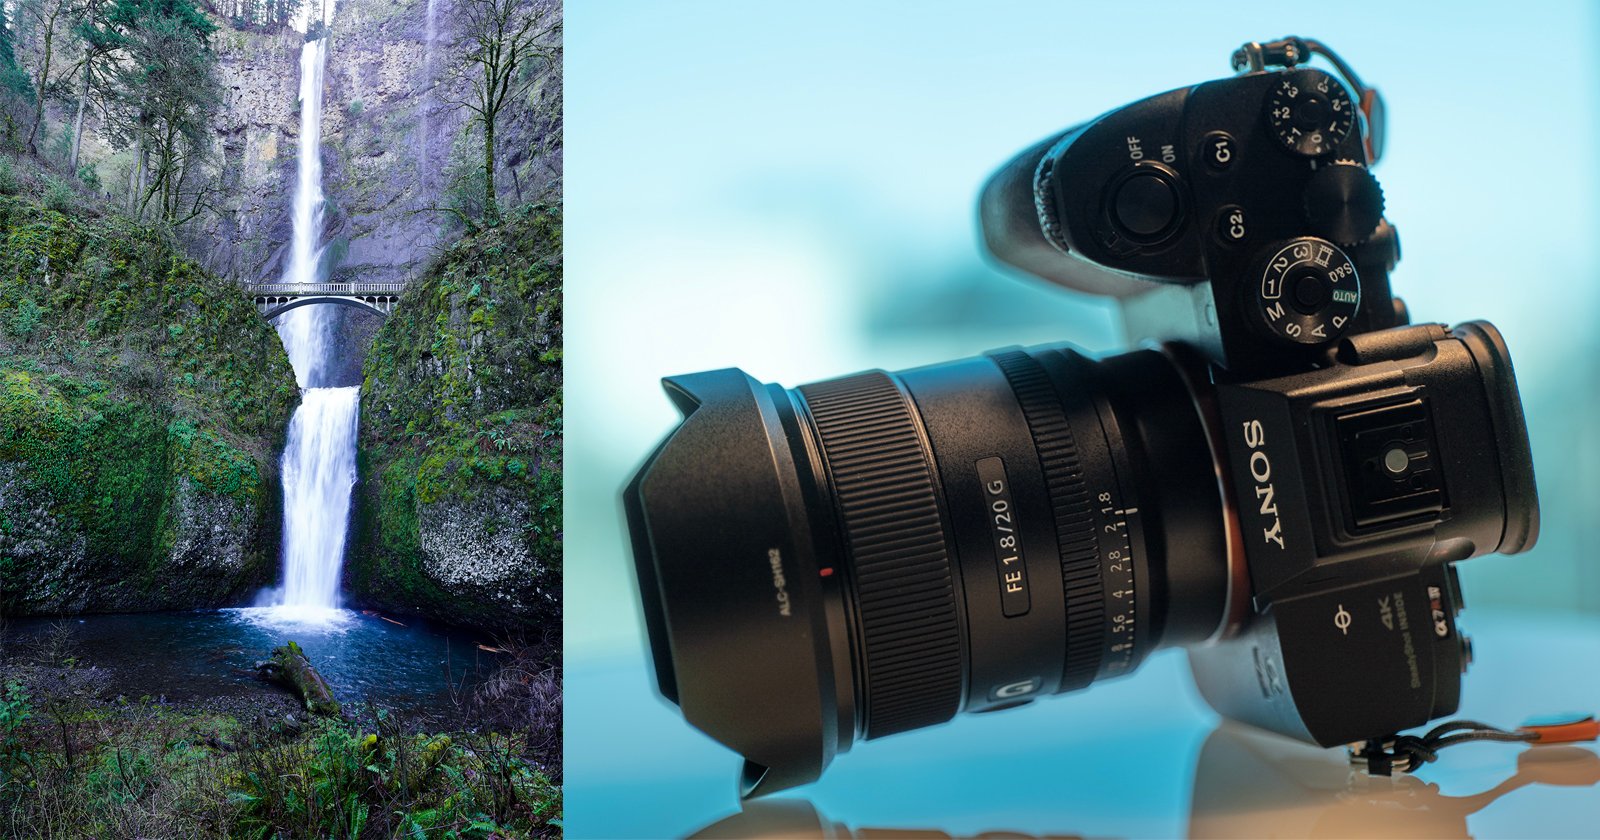 As Expected, the Sony 20mm f/1.8 G Looks Really Good